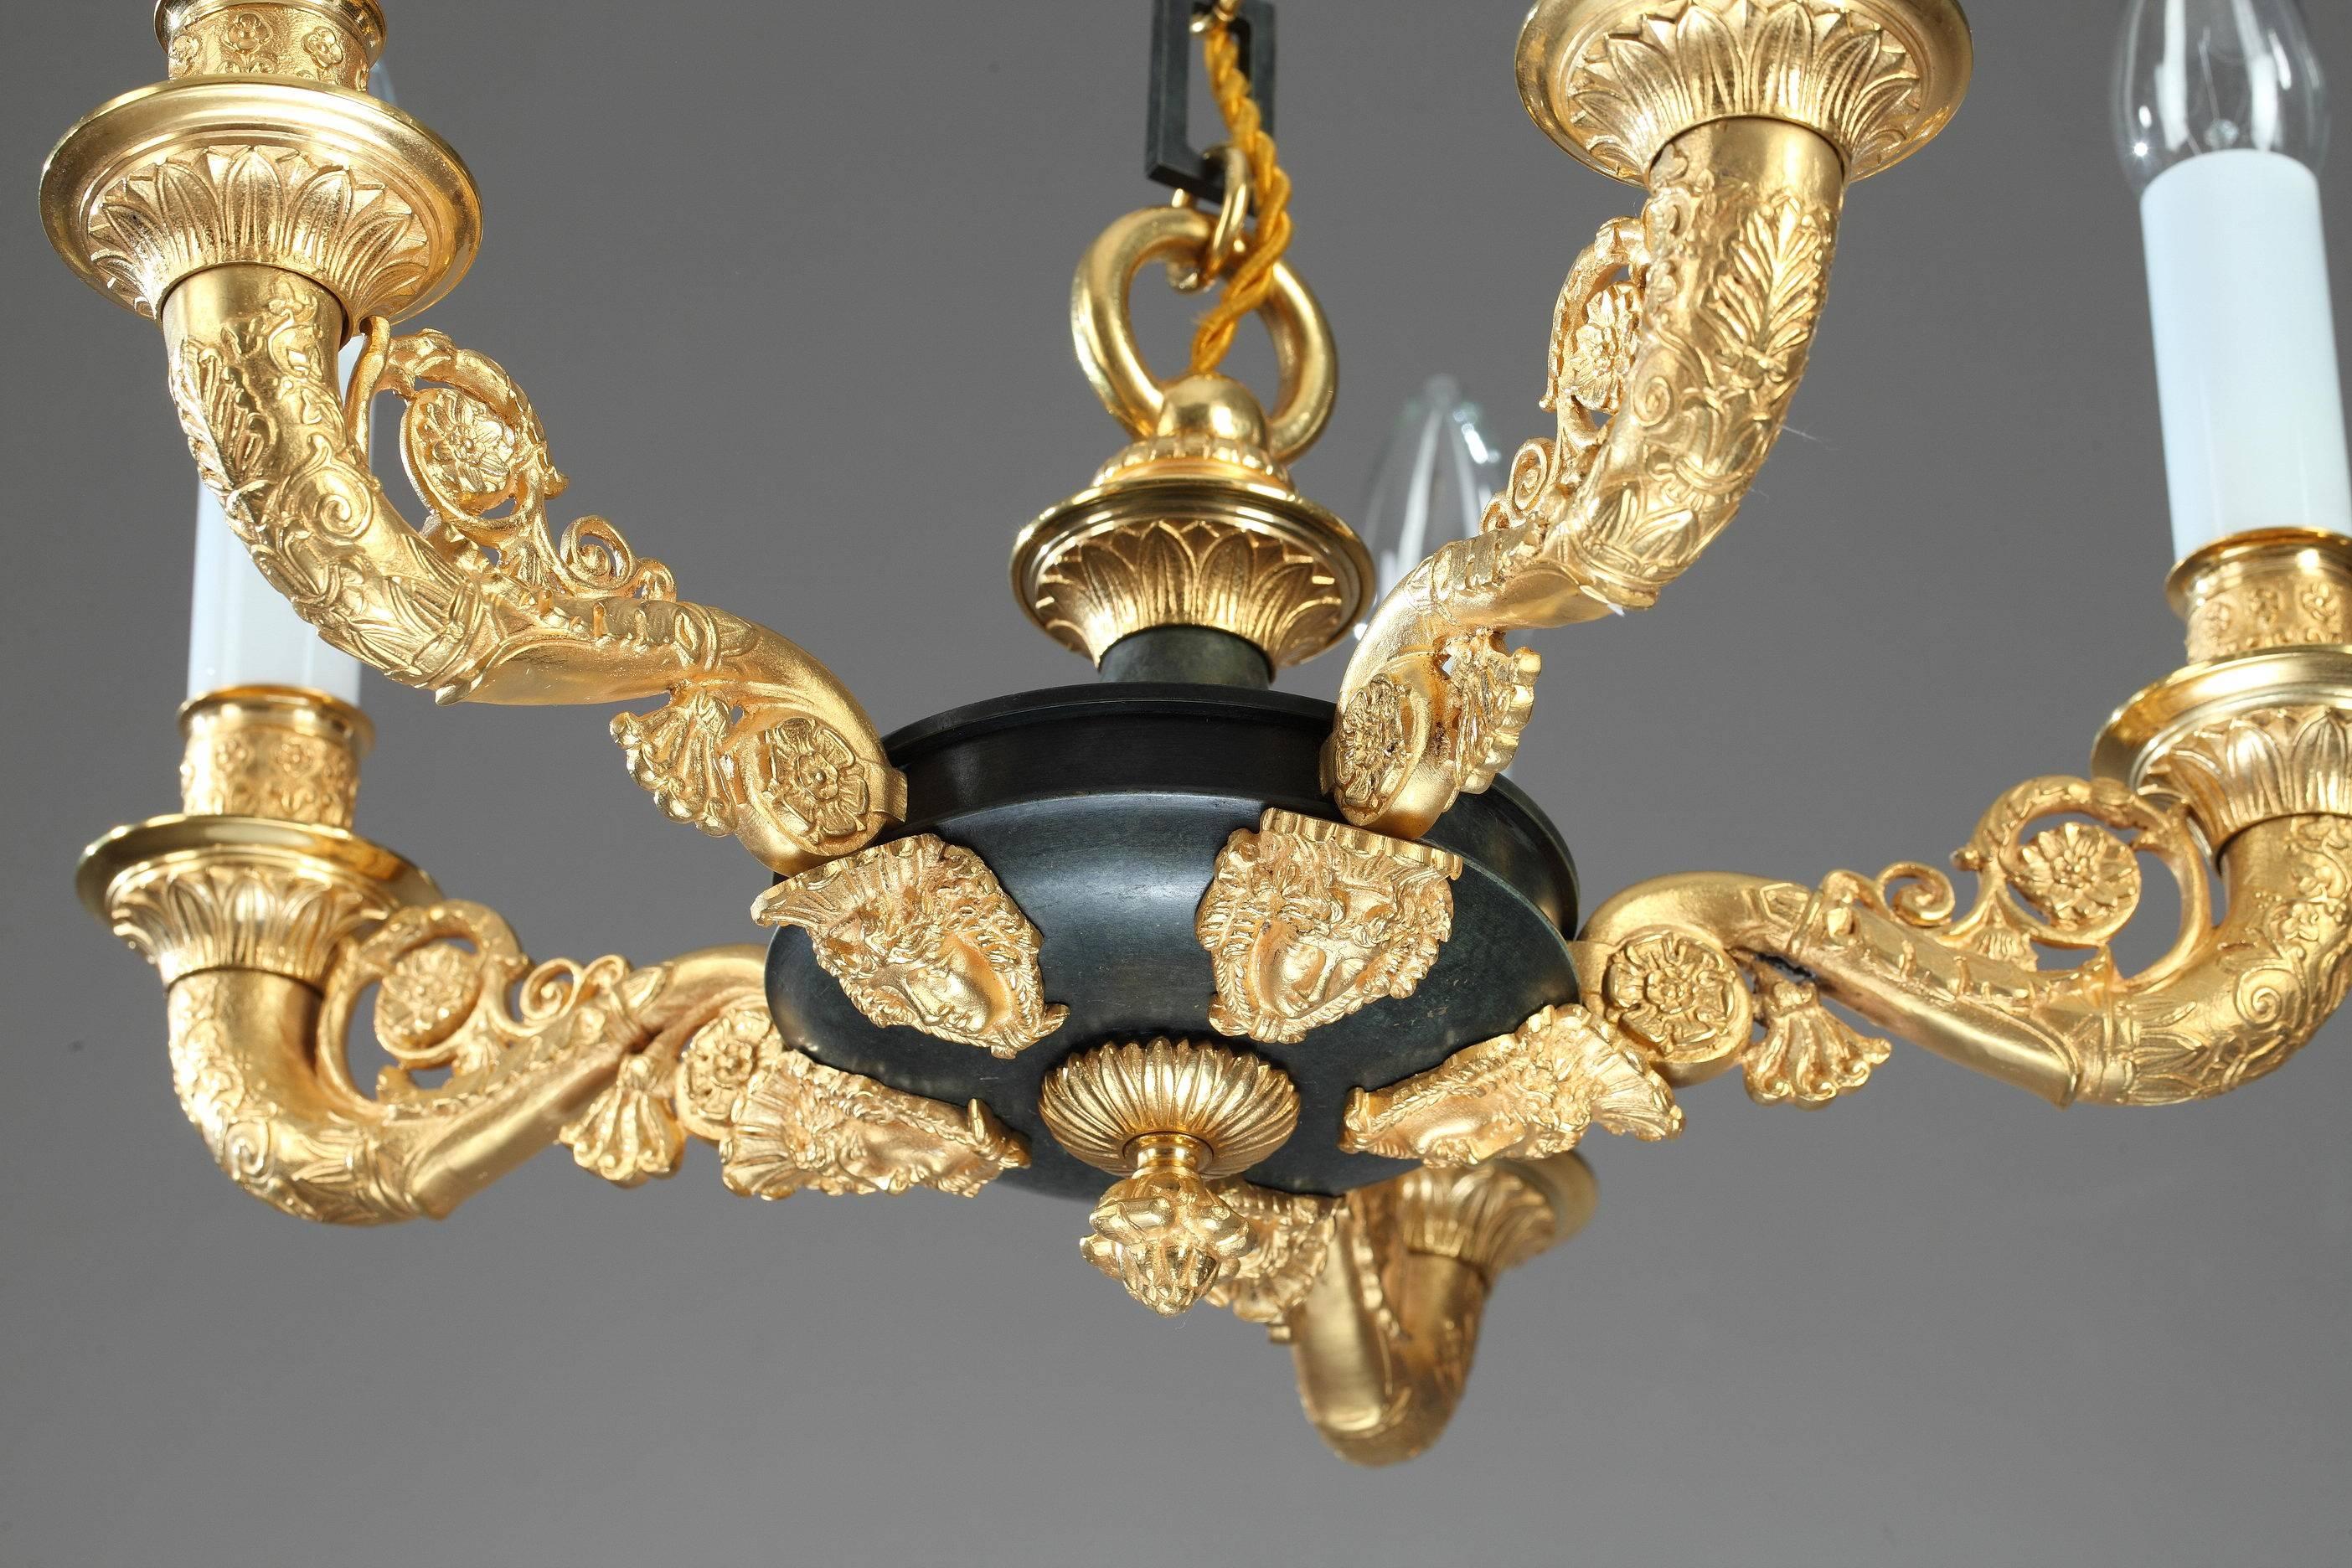 French Early 19th Century Restauration Period Gilt and Patinated Bronze Chandelier